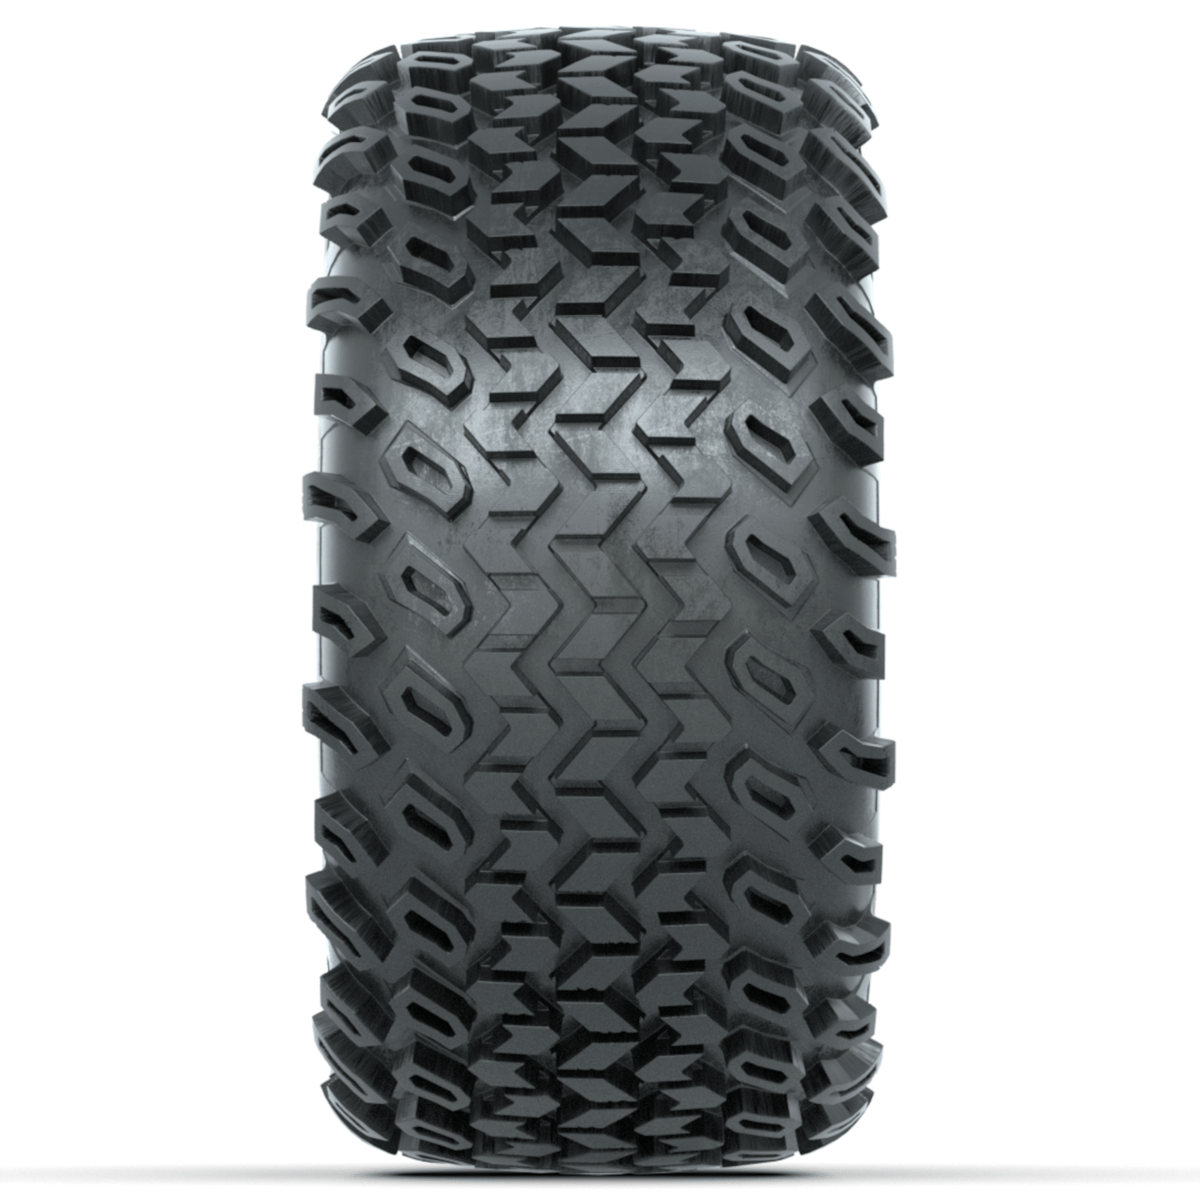 23x10.50-12 Duro Desert A/T Tire (Lift Required)